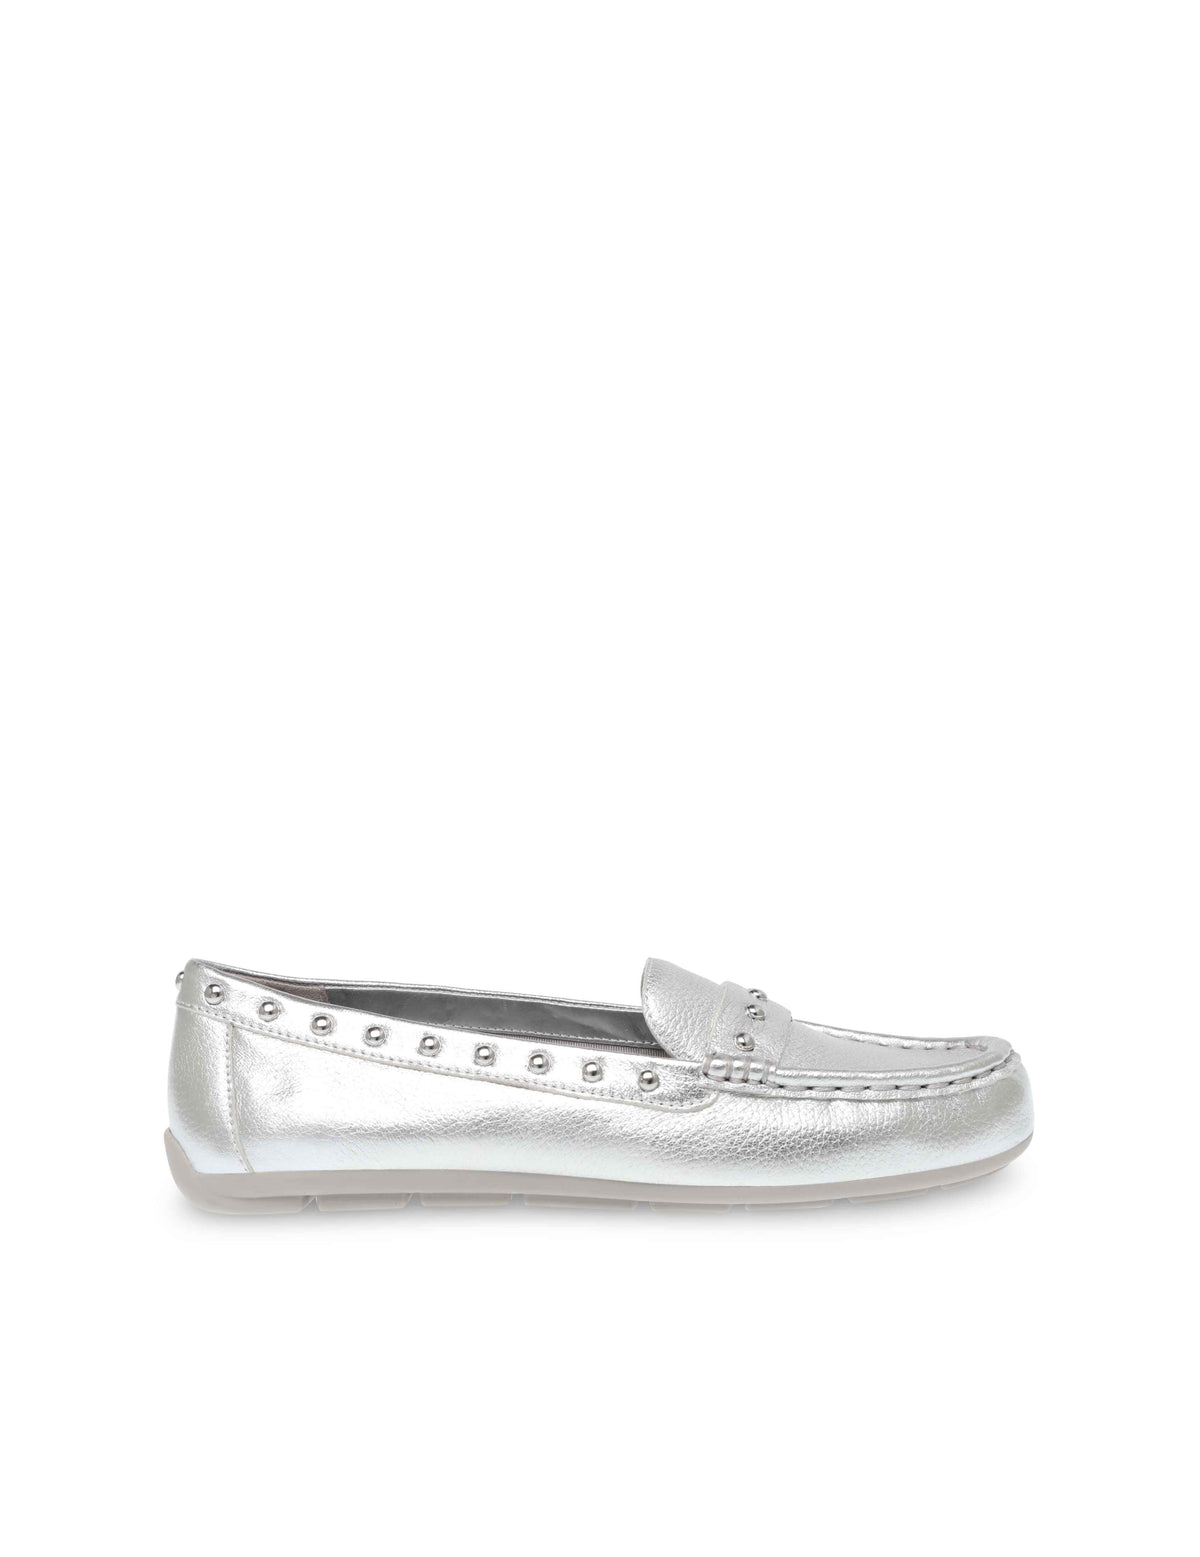 On It Studded Faux Leather Loafer